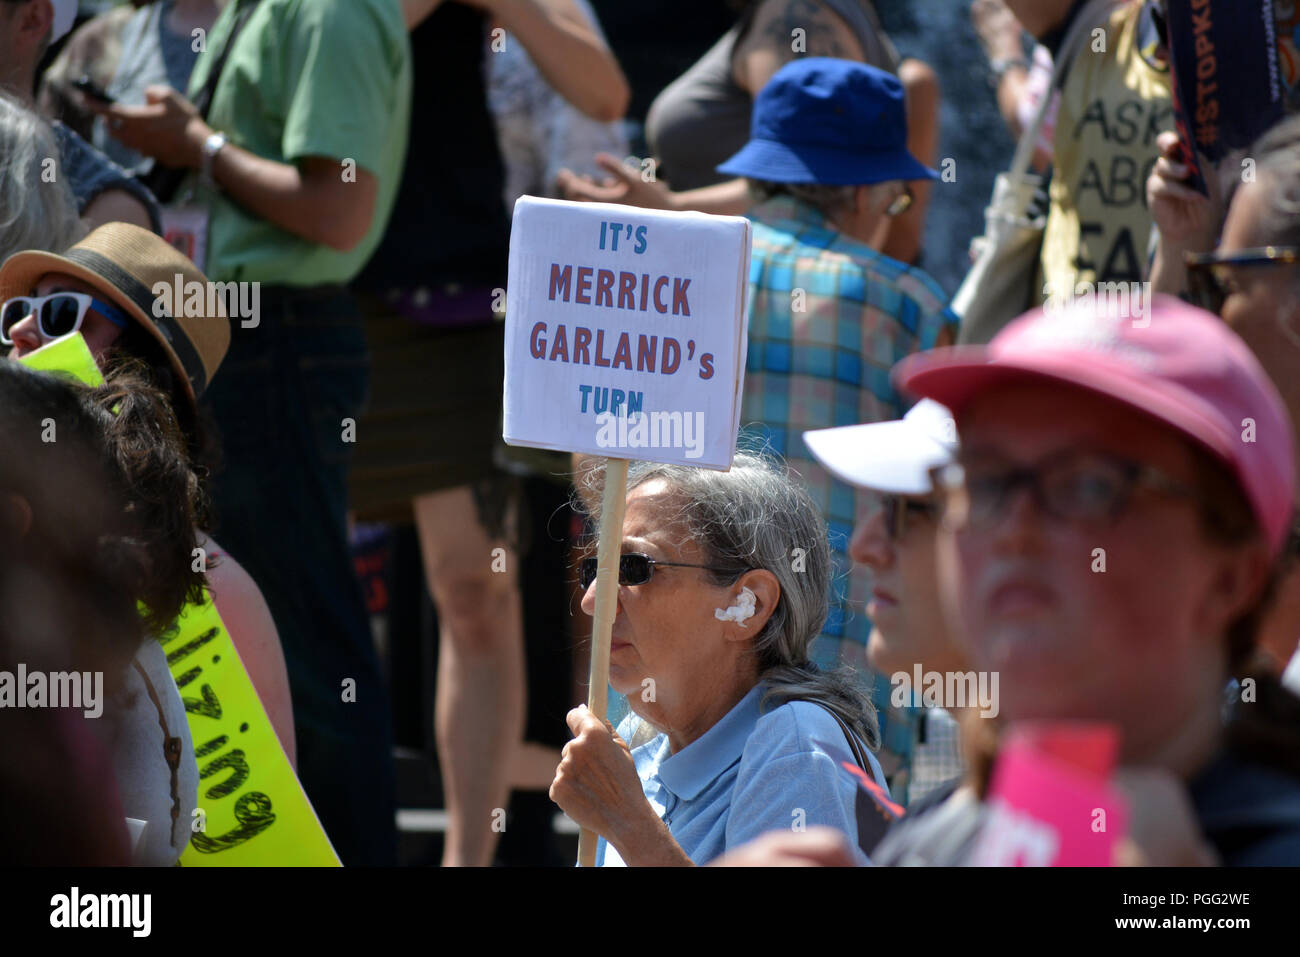 New York, USA. 26th Aug 2018. People protesting Supreme Court nominee Brett Kavanaugh at a rally in New York City.. Credit: Christopher Penler/Alamy Live News Stock Photo